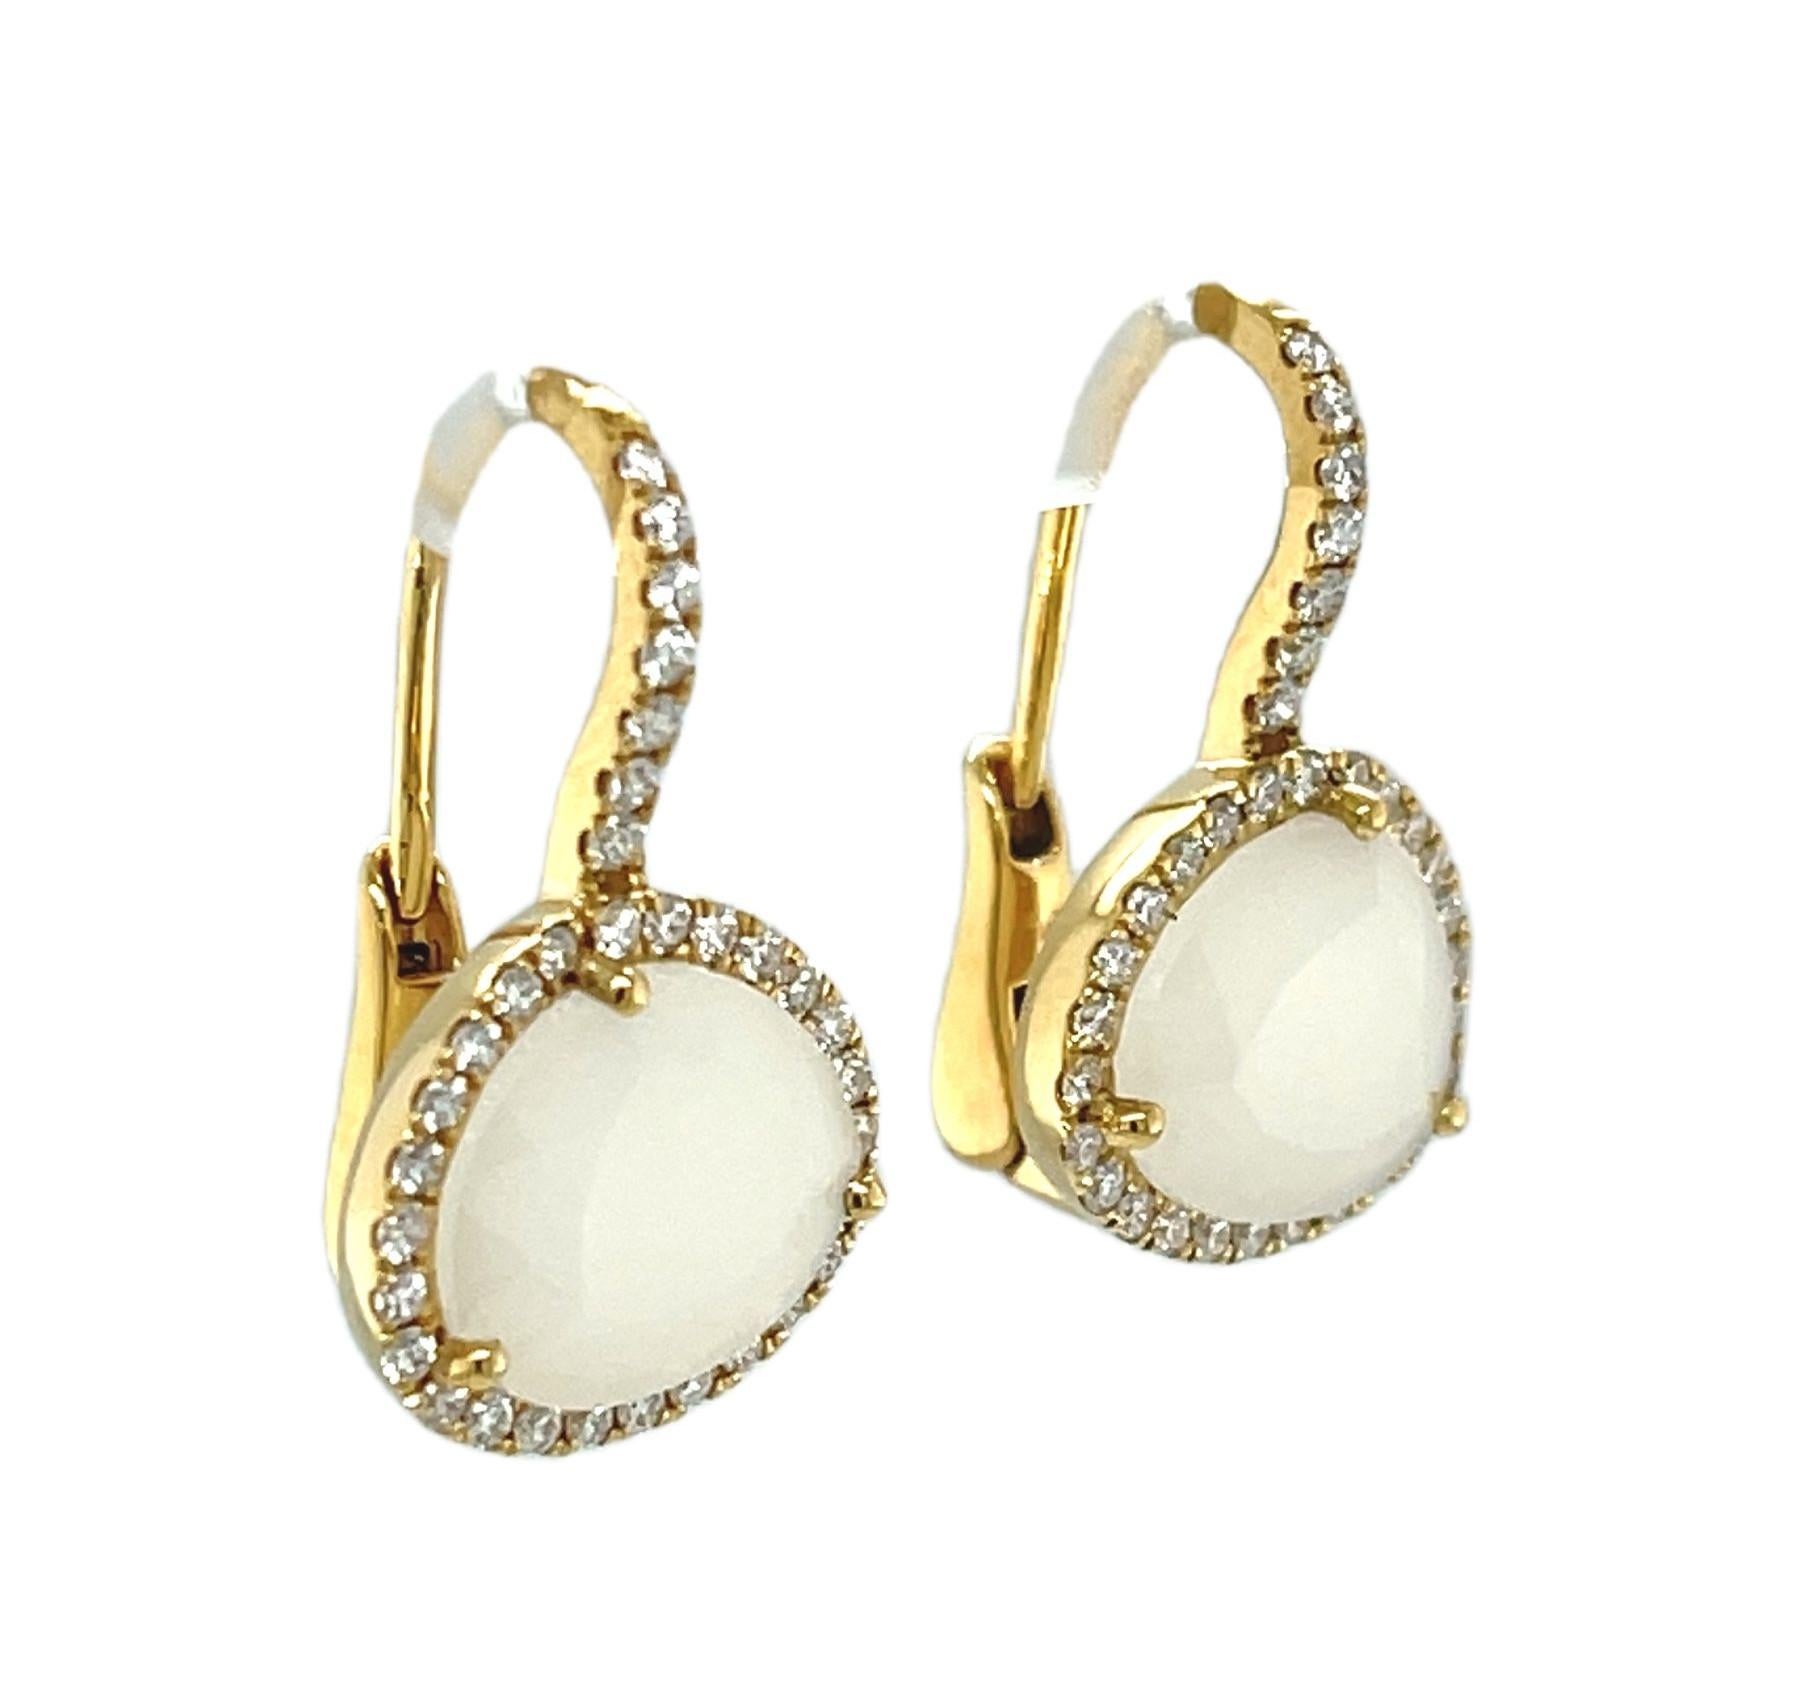 These stylish drop earrings feature pearlescent moonstones surrounded by diamond halos crafted in 18k yellow gold. The moonstones have been faceted - a very unique cutting style for moonstone -  allowing them to display beautiful facet reflections